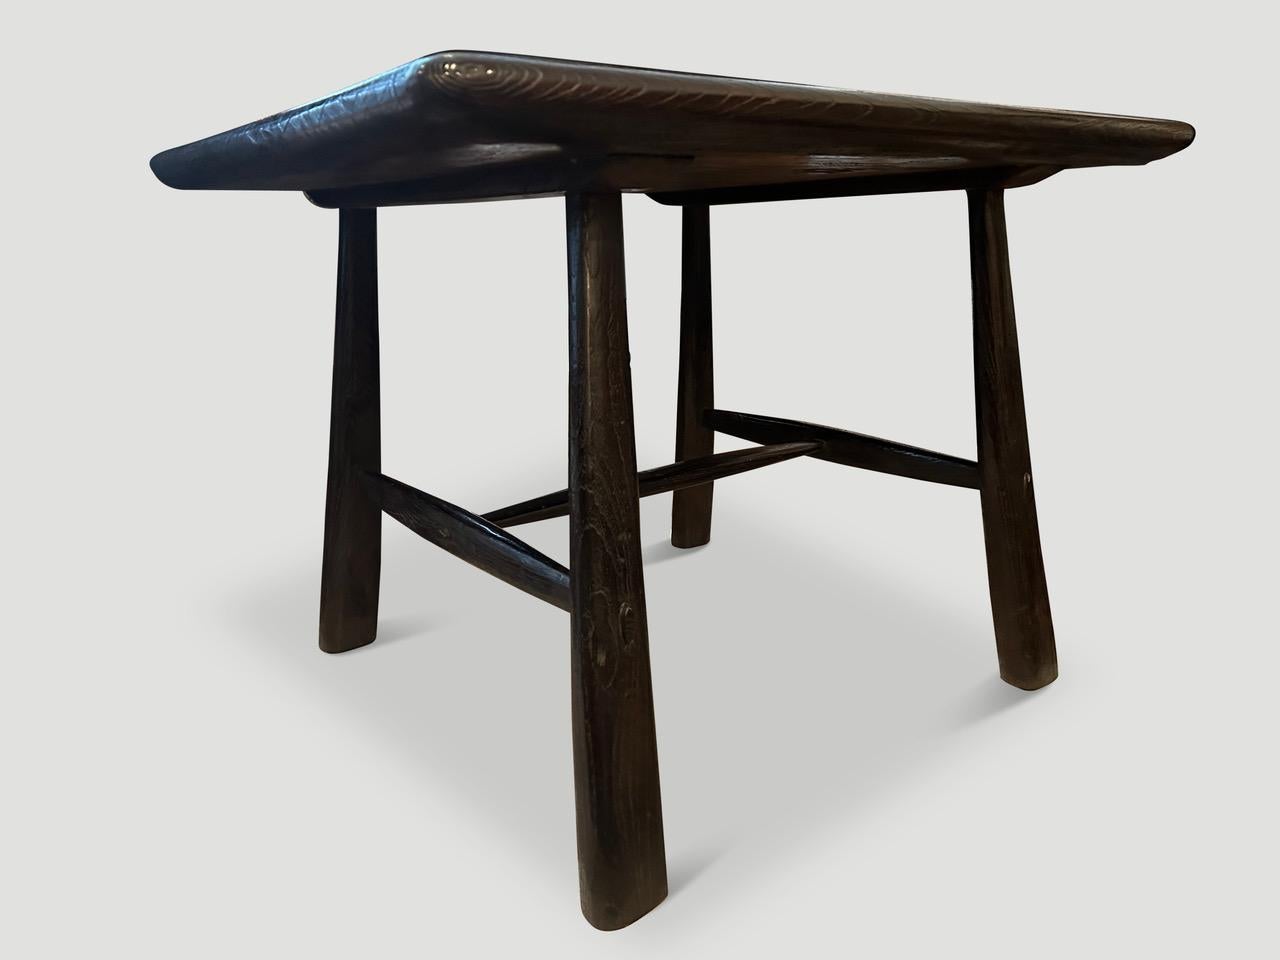 Andrianna Shamaris Mid Century Couture Espresso Stained Teak Wood Table In Excellent Condition For Sale In New York, NY